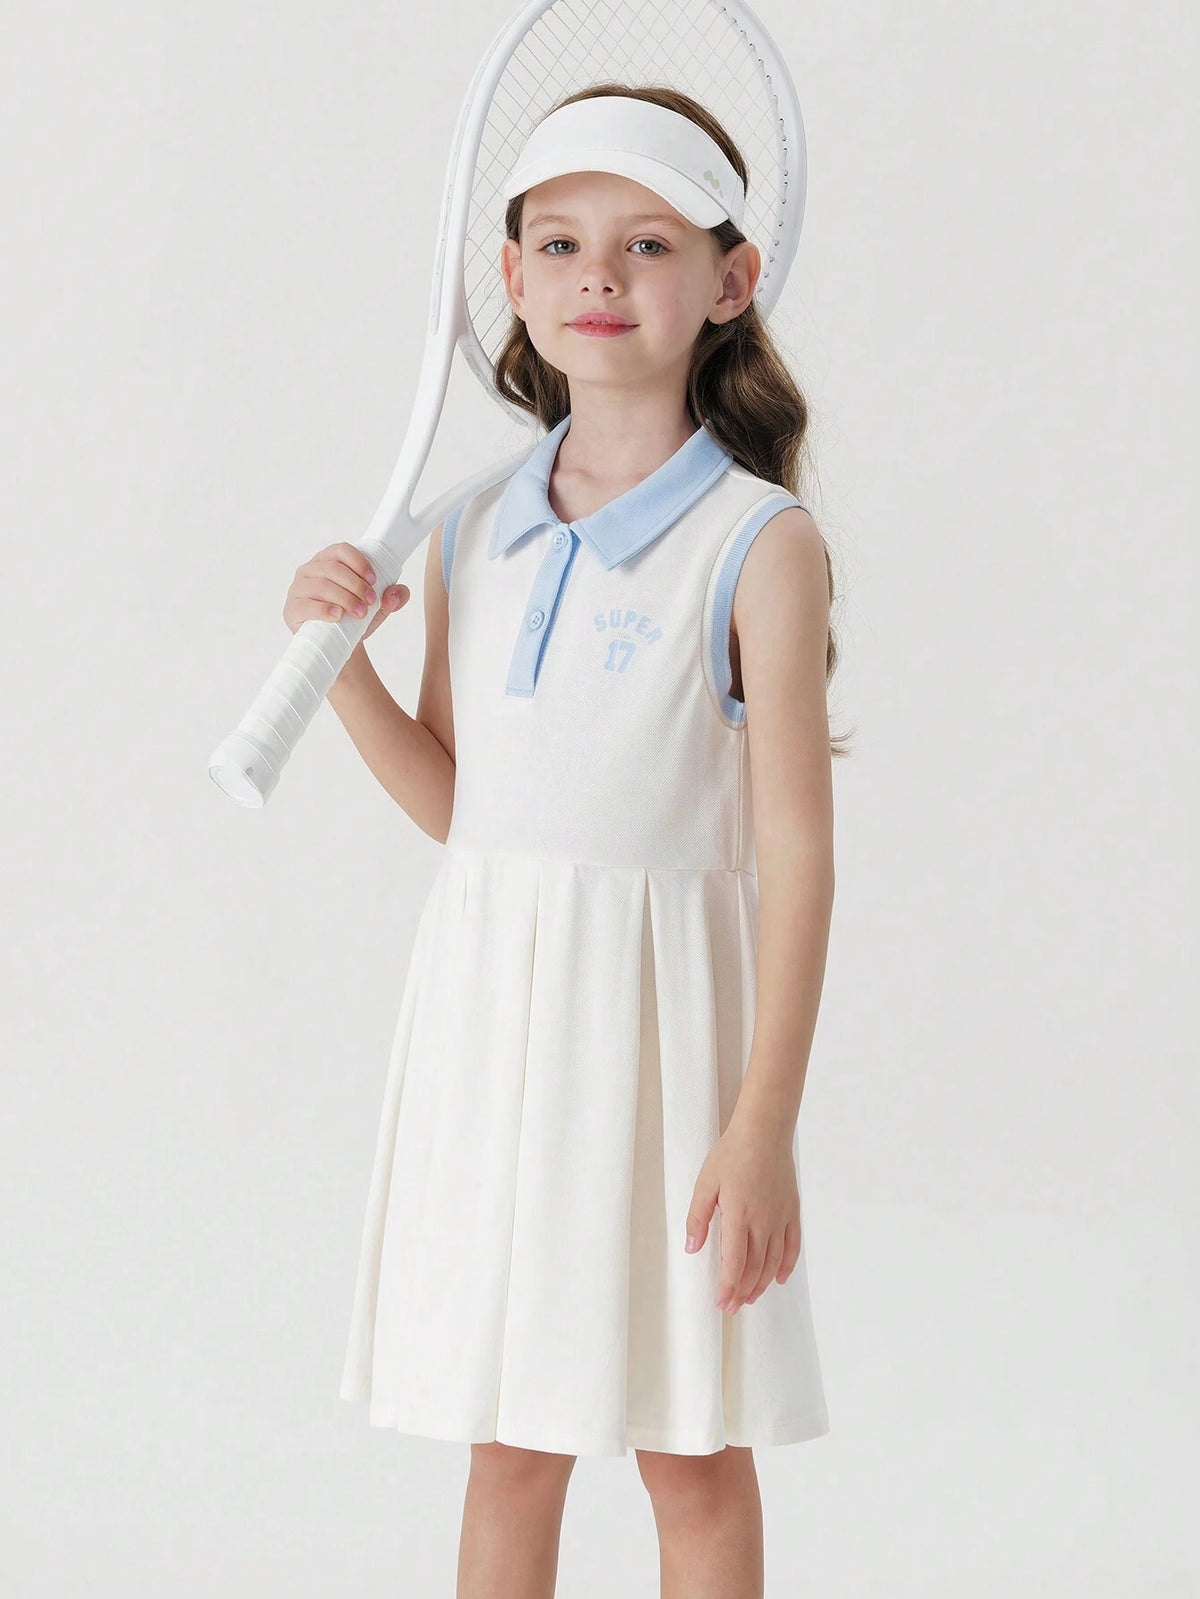 Young Girls" Sporty Sleeveless Polo Dress With Pleated Hem And Colorful Striped Collar, Quick-Dry And Cool For Summer